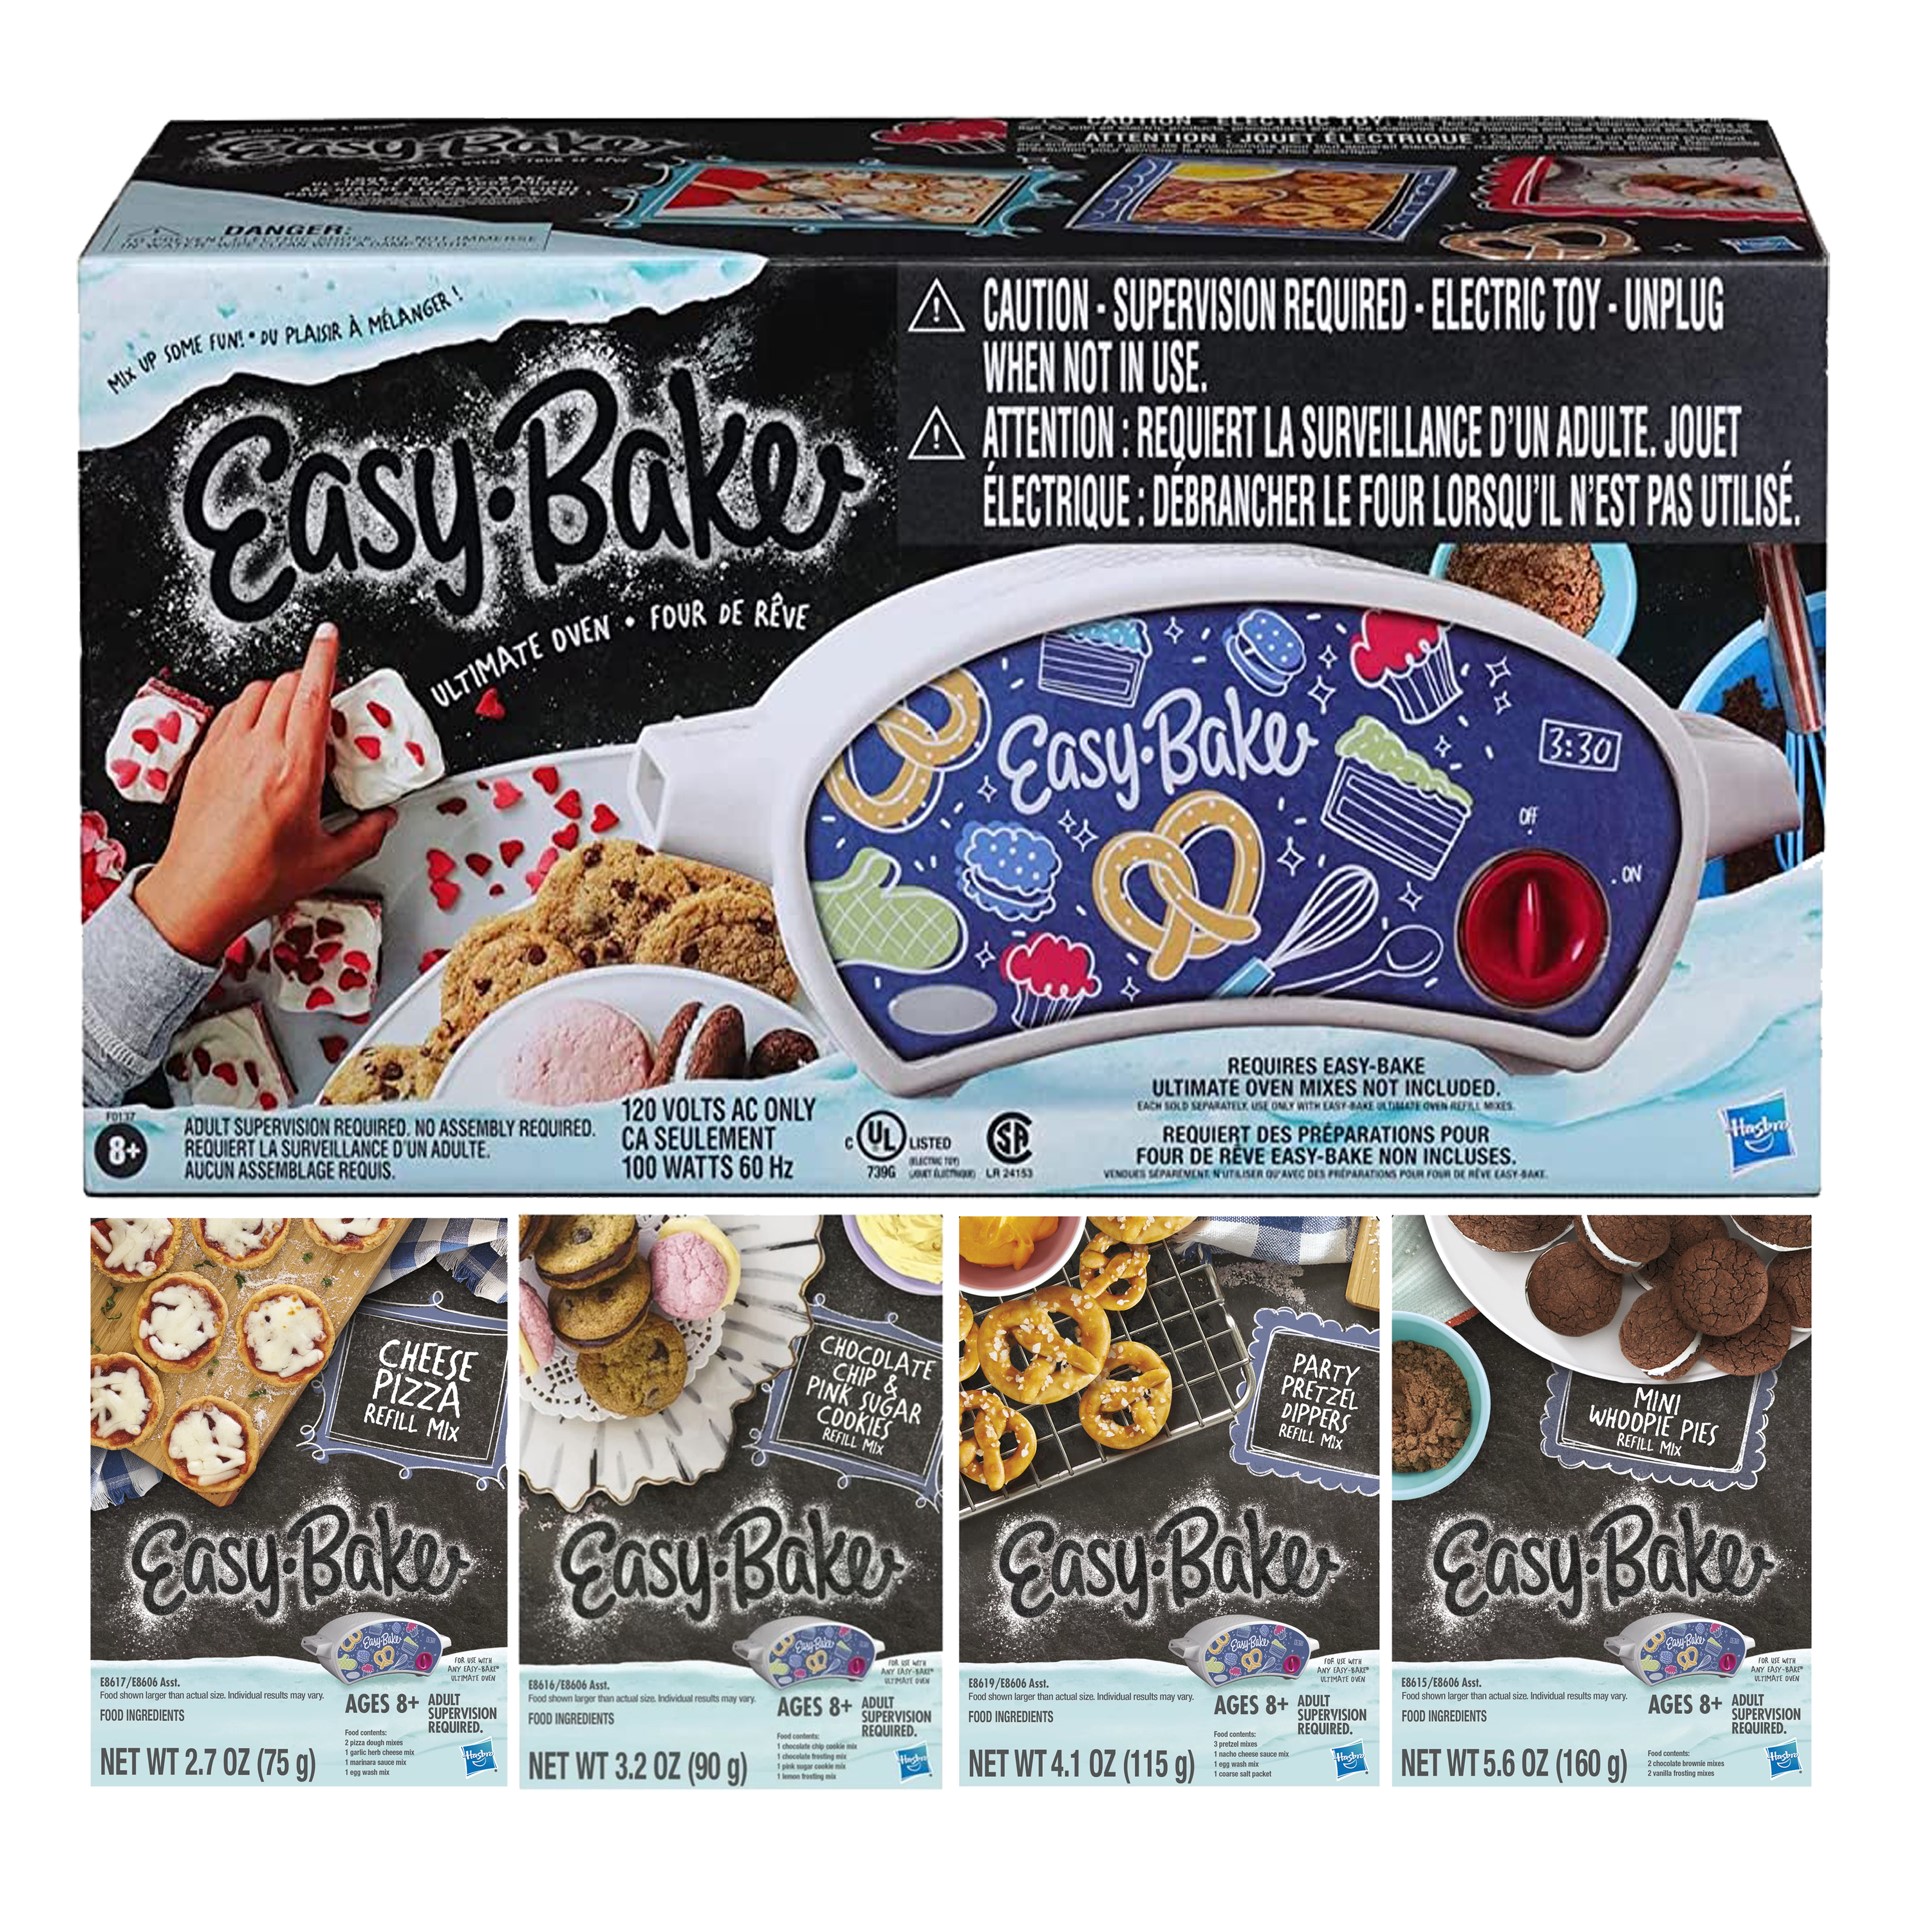 Easy Bake Ultimate Oven Baking Bundle with Easy Bake Ultimate Oven, Chocolate Chip & Pink Sugar Cookies, Pretzel, Mini Whoopie, Cheese Pizza Mixes and More for Kids 8yrs and Up - image 1 of 8